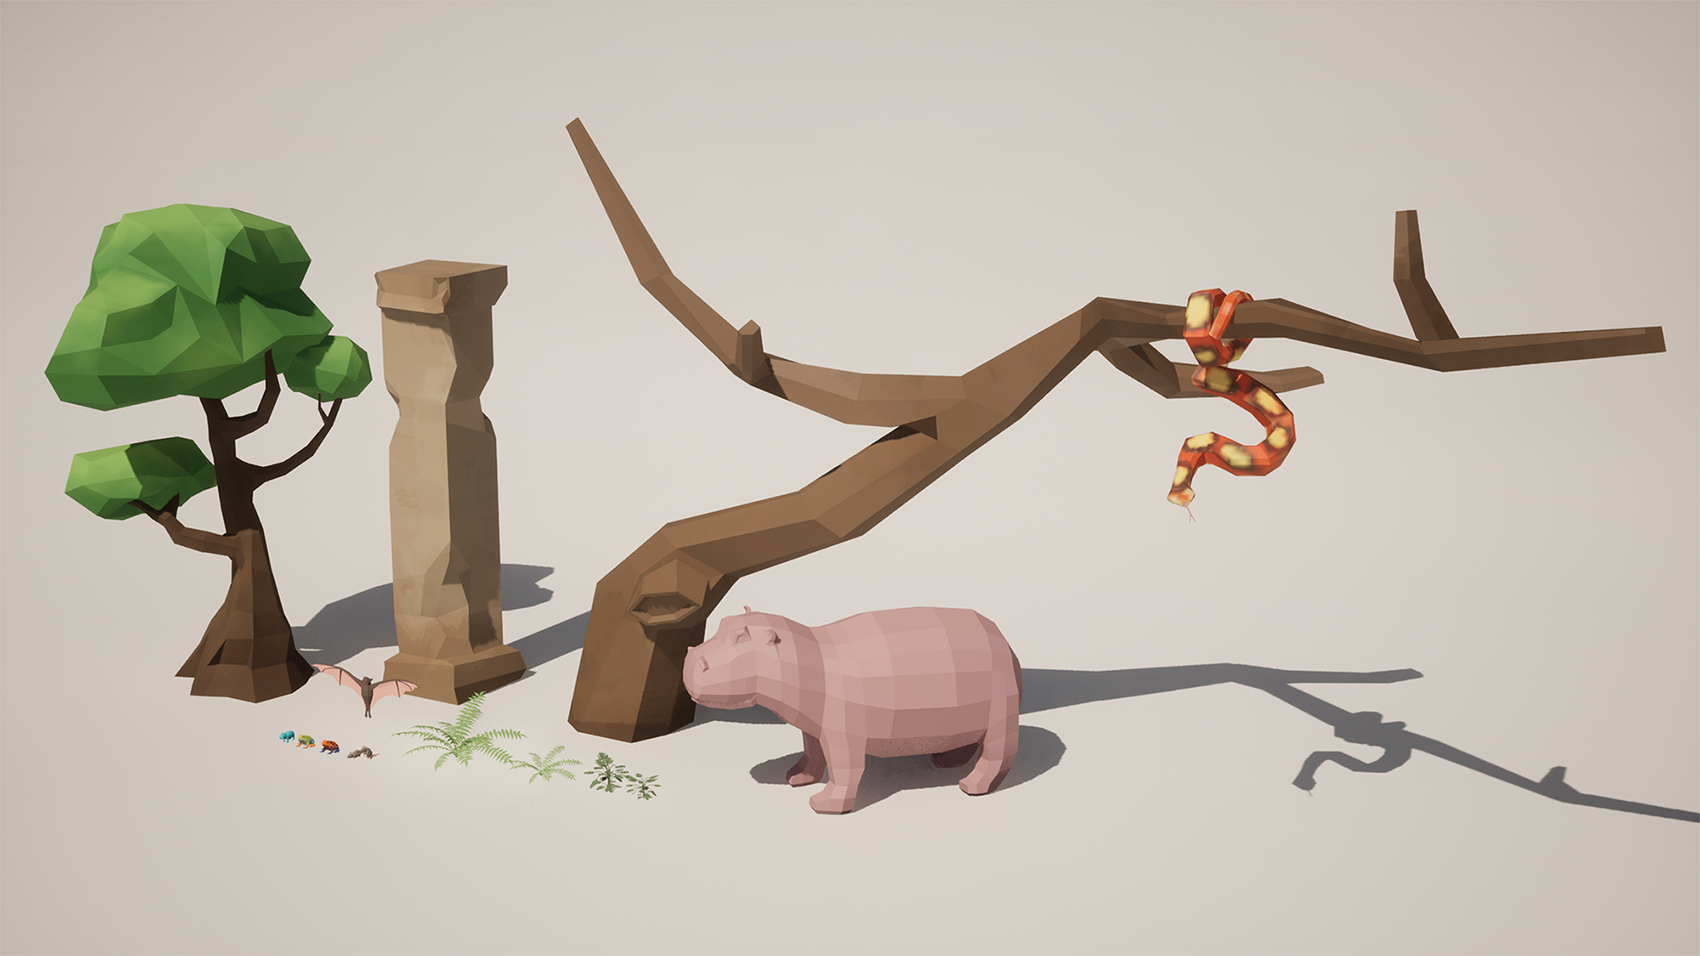 Game assets, including a hippo and trees.